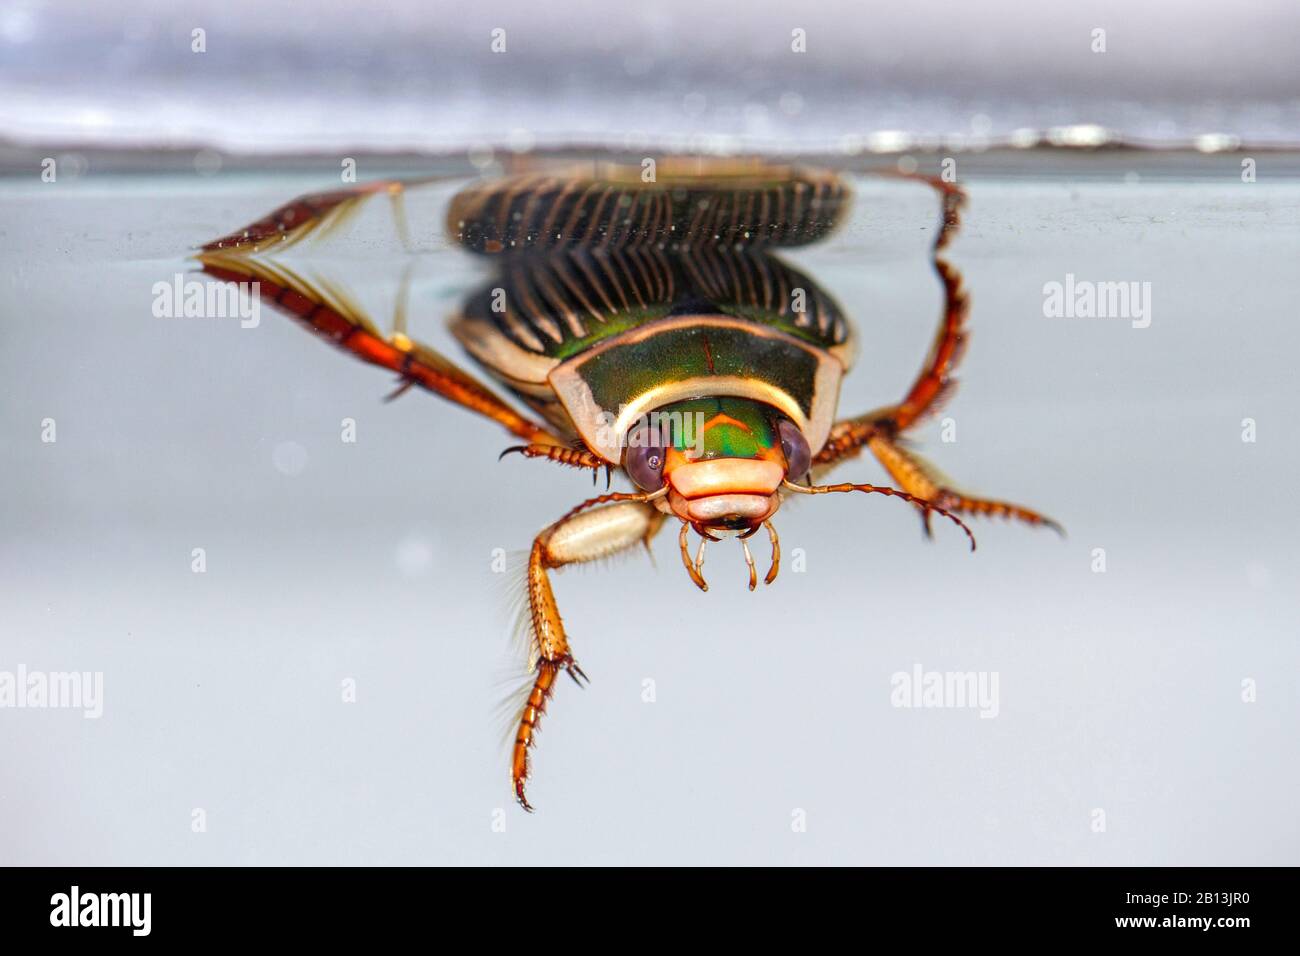 Great diving beetle (Dytiscus marginalis), female neneath water surface, Germany, Baden-Wuerttemberg Stock Photo